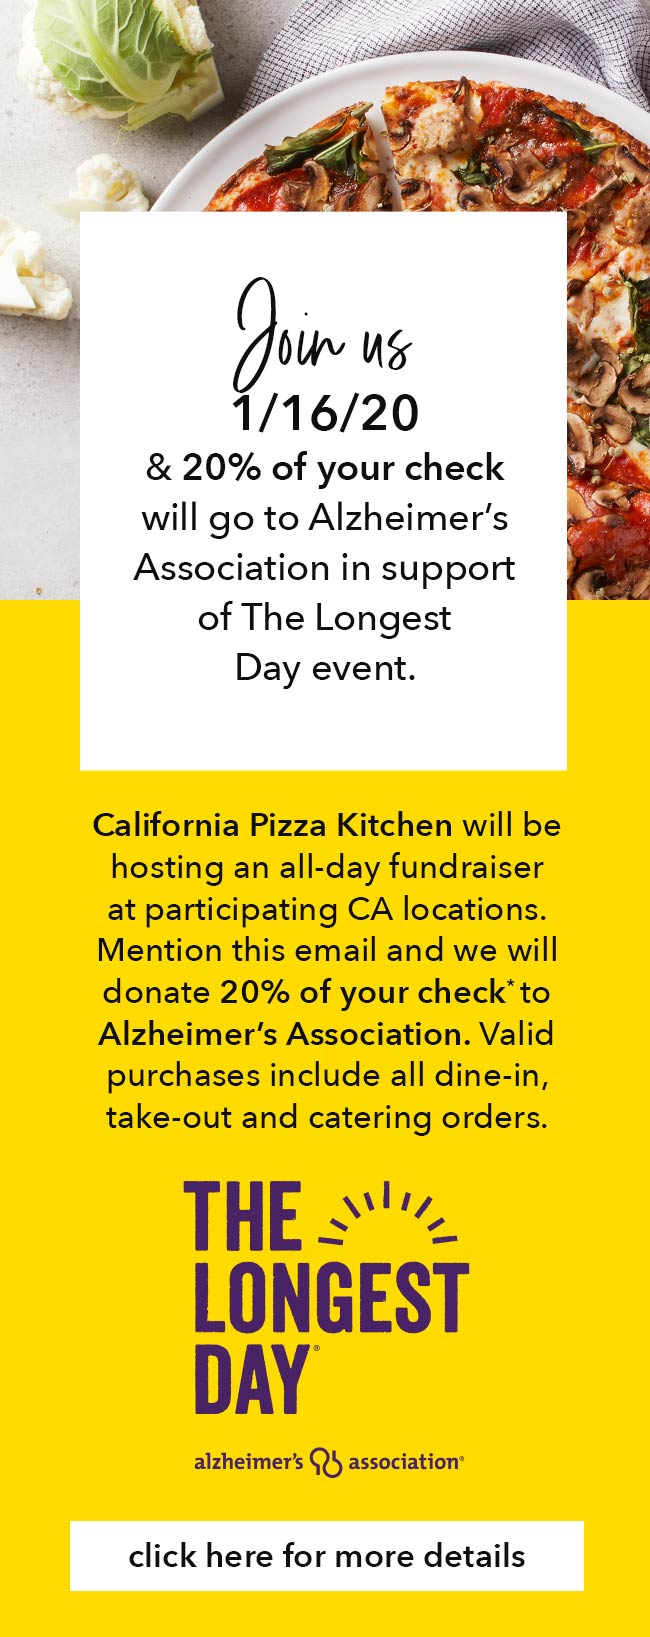 Join us 1/16/20 & 20% of your check will go to Alzheimer's Association in support of The Longest Day event. California Pizza Kitchen will be hosting an all-day fundraiser at participating CA locations. Mention this email and we will donate 20% of your check* to Alzheimer's Association. Valid purchases include all dine-in, take-out and catering orders. Click here for more details